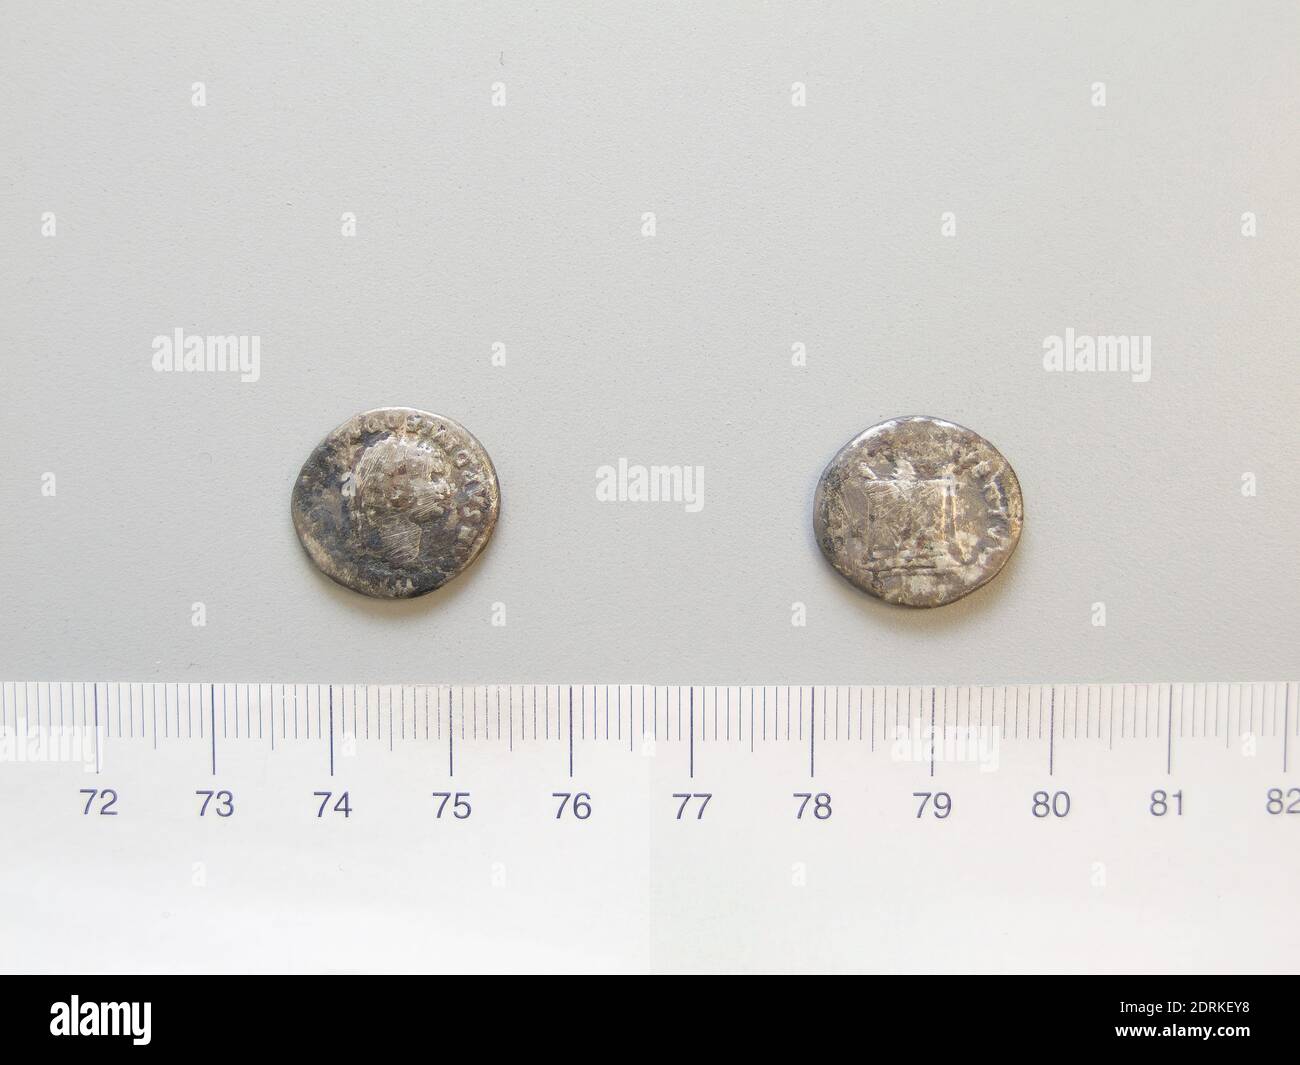 Ruler: Titus, Emperor of Rome, A.D. 39–81, ruled 79–81, Mint: Rome, Honorand: Domitian, Emperor of Rome, A.D. 51–96, ruled 81–96, Denarius of Titus, Emperor of Rome from Rome, 80–81, Silver, 2.82 g, 6:00, 17.4 mm, Made in Rome, Italy, Roman, 1st century A.D., Numismatics Stock Photo